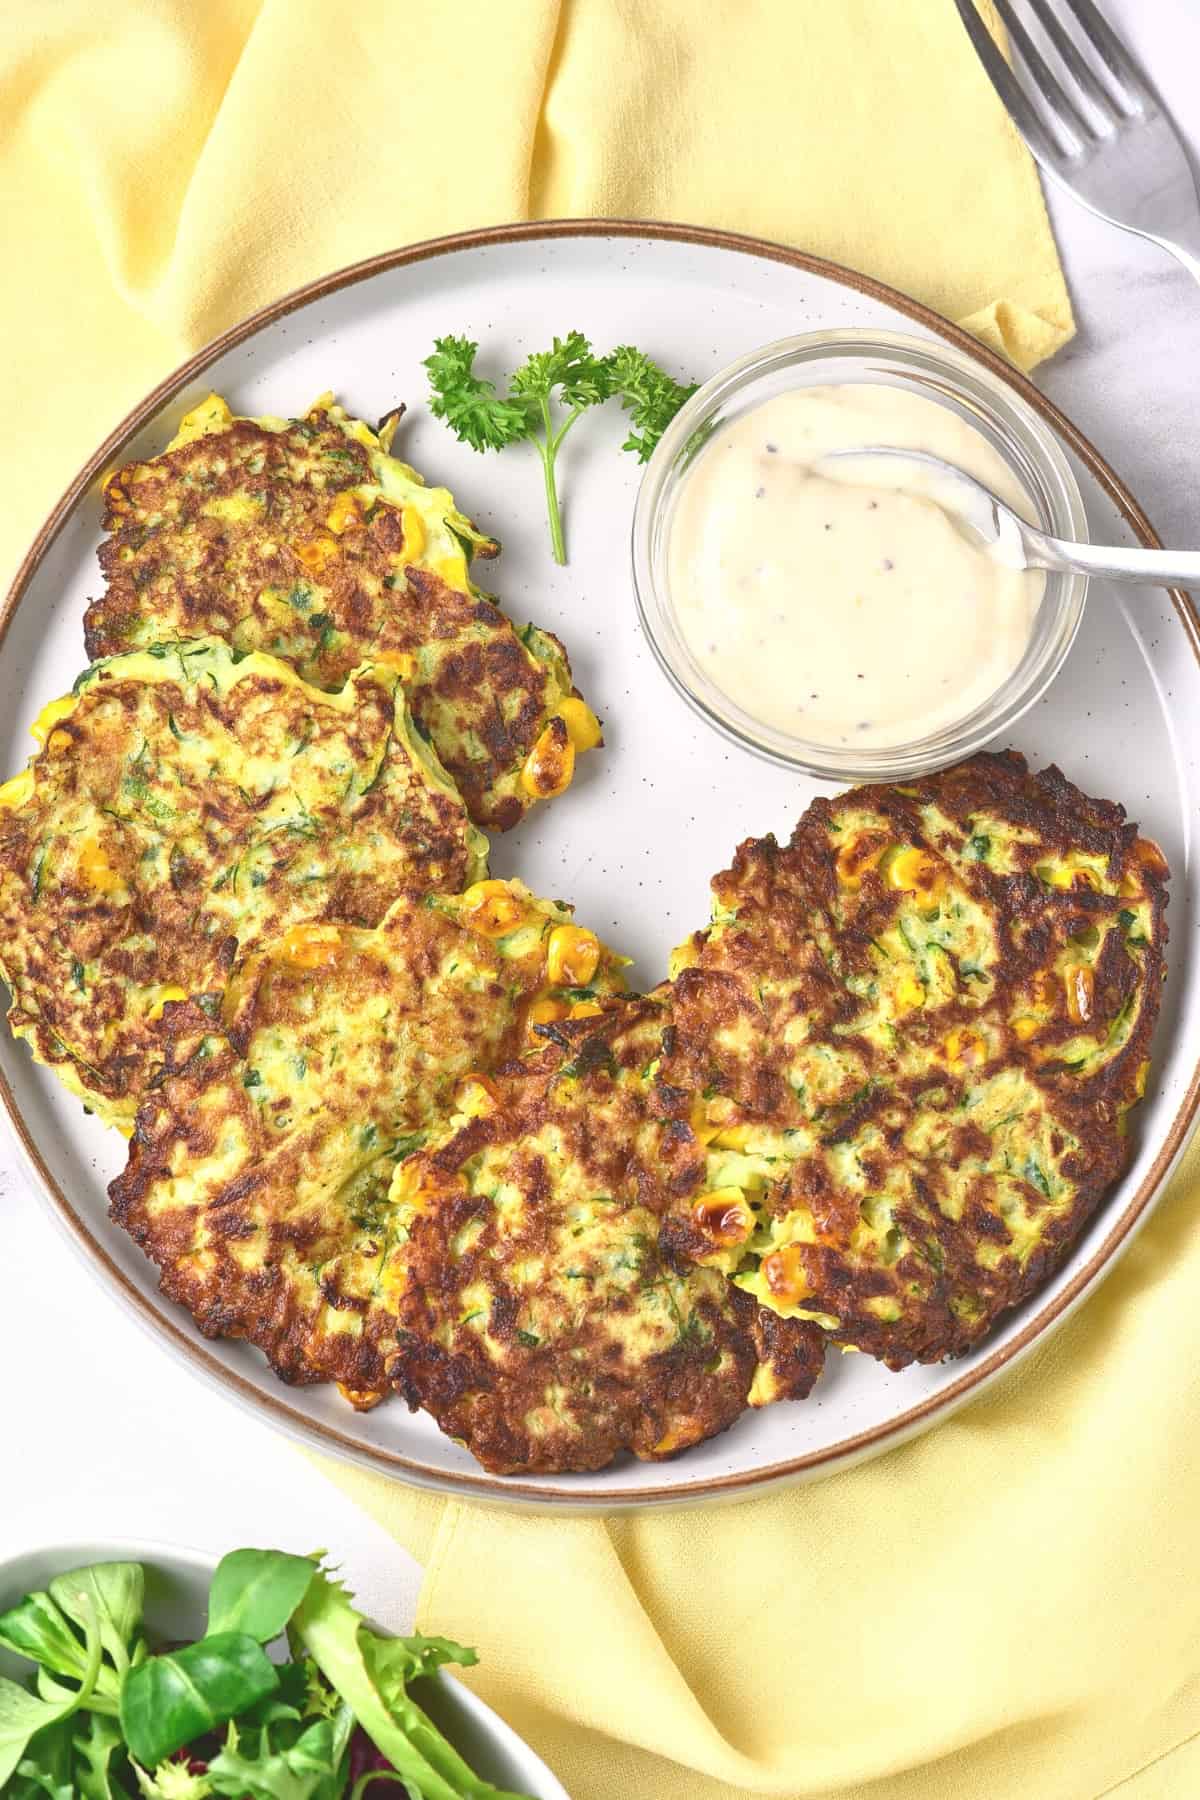 Top down view of zucchini fritters and garlic aioli on a plate.